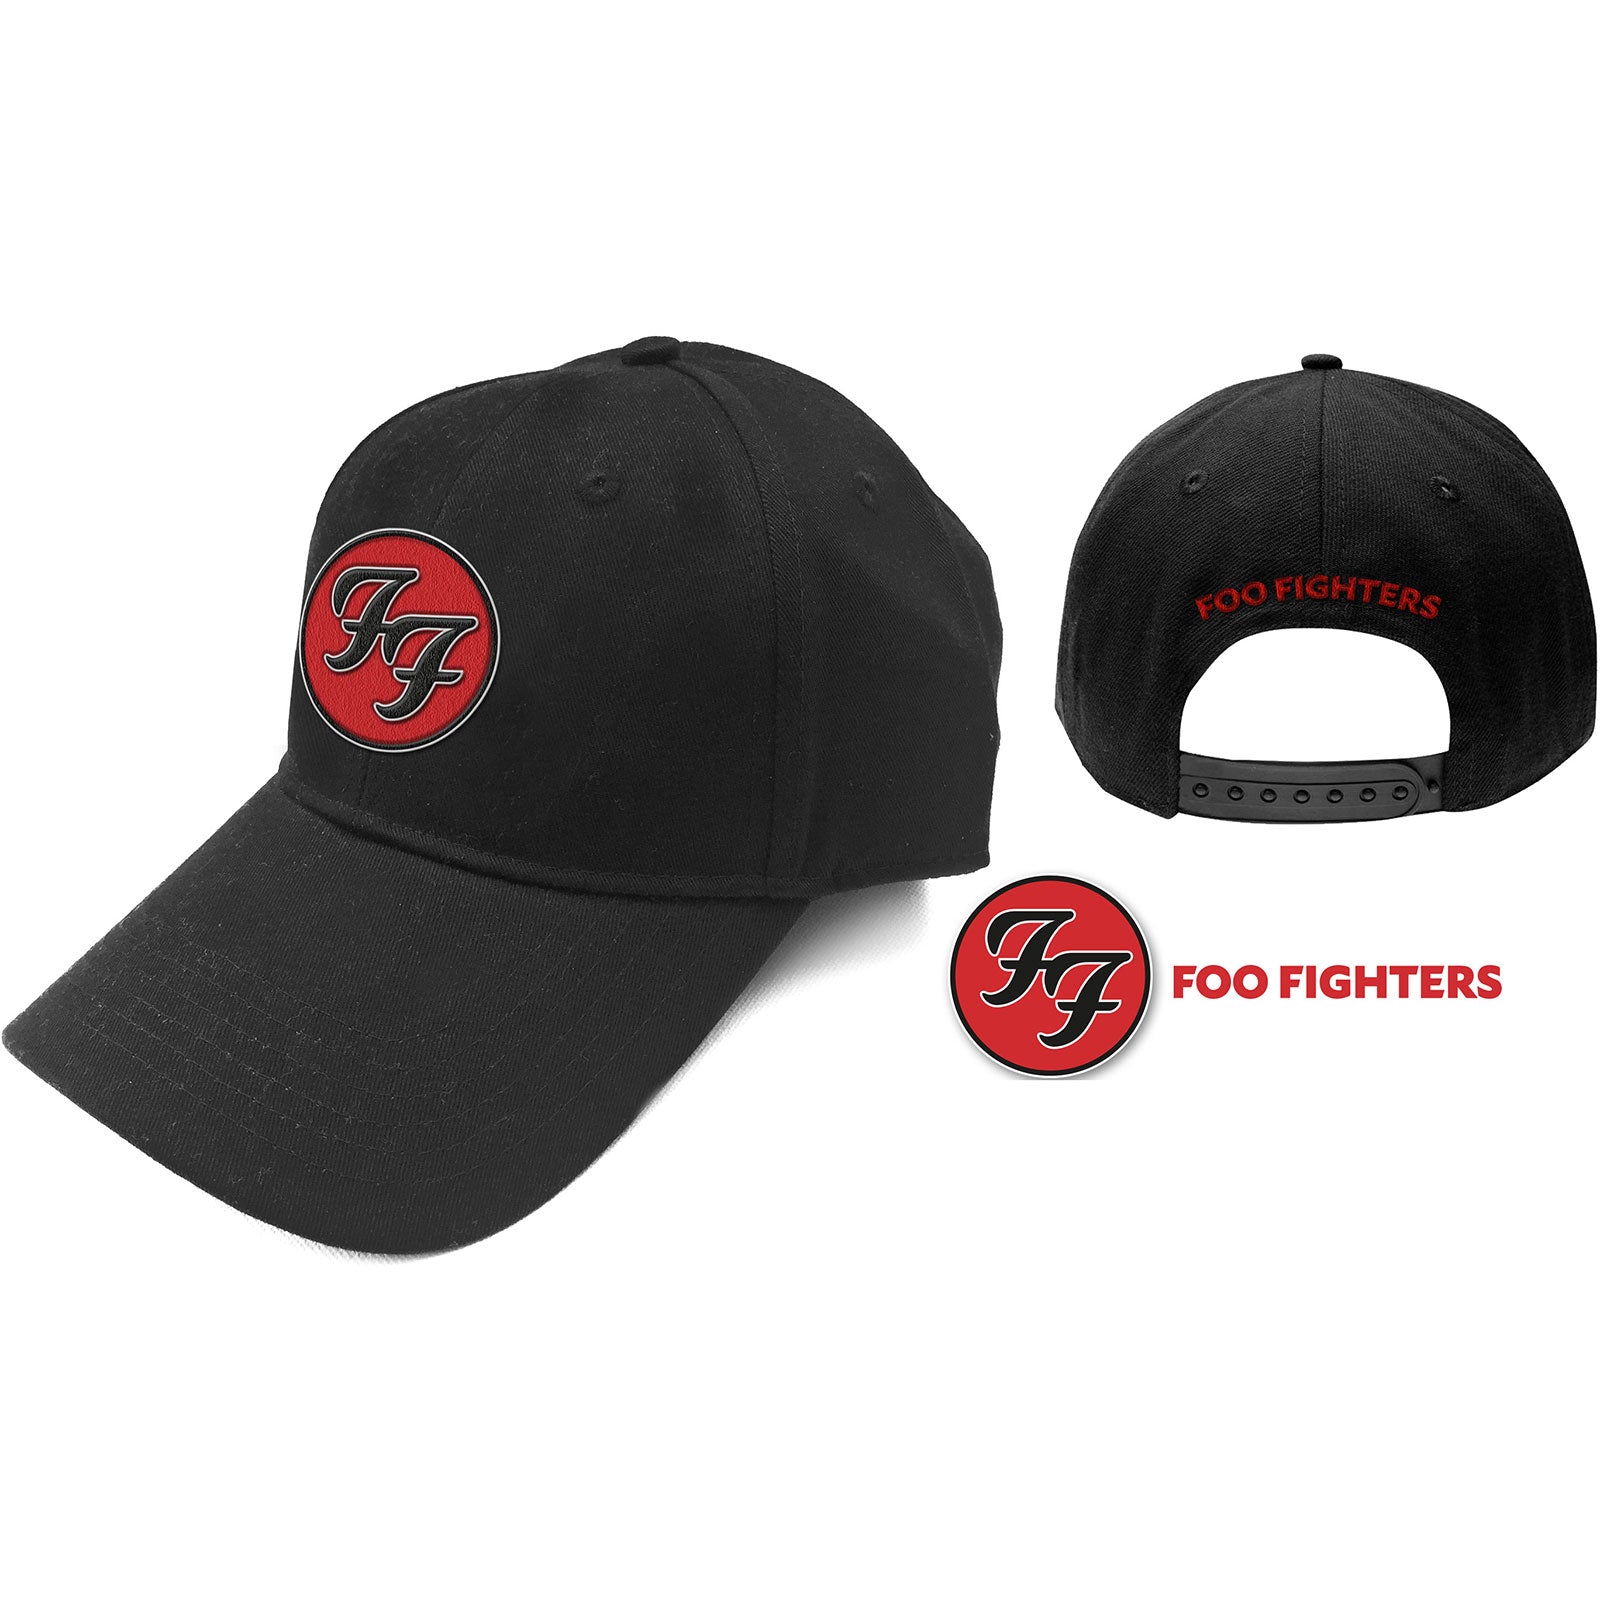 Officially Licensed Foo Fighters Cap- One Size Black Music Rock